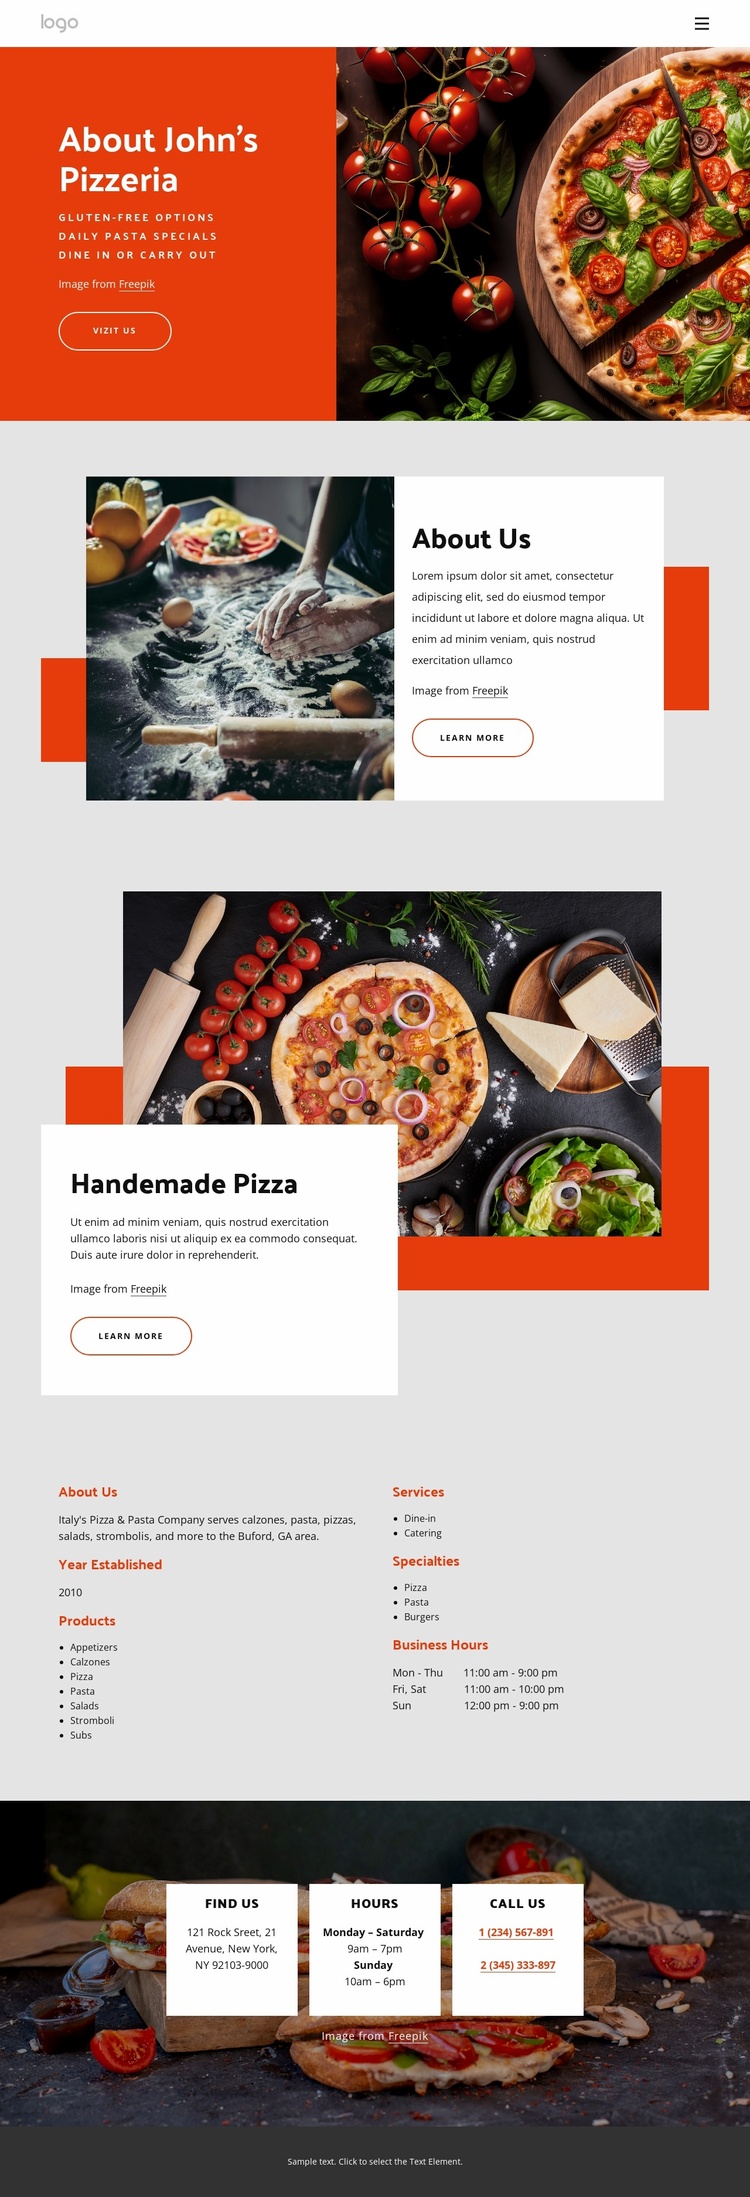 About our pizzeria Ecommerce Website Design